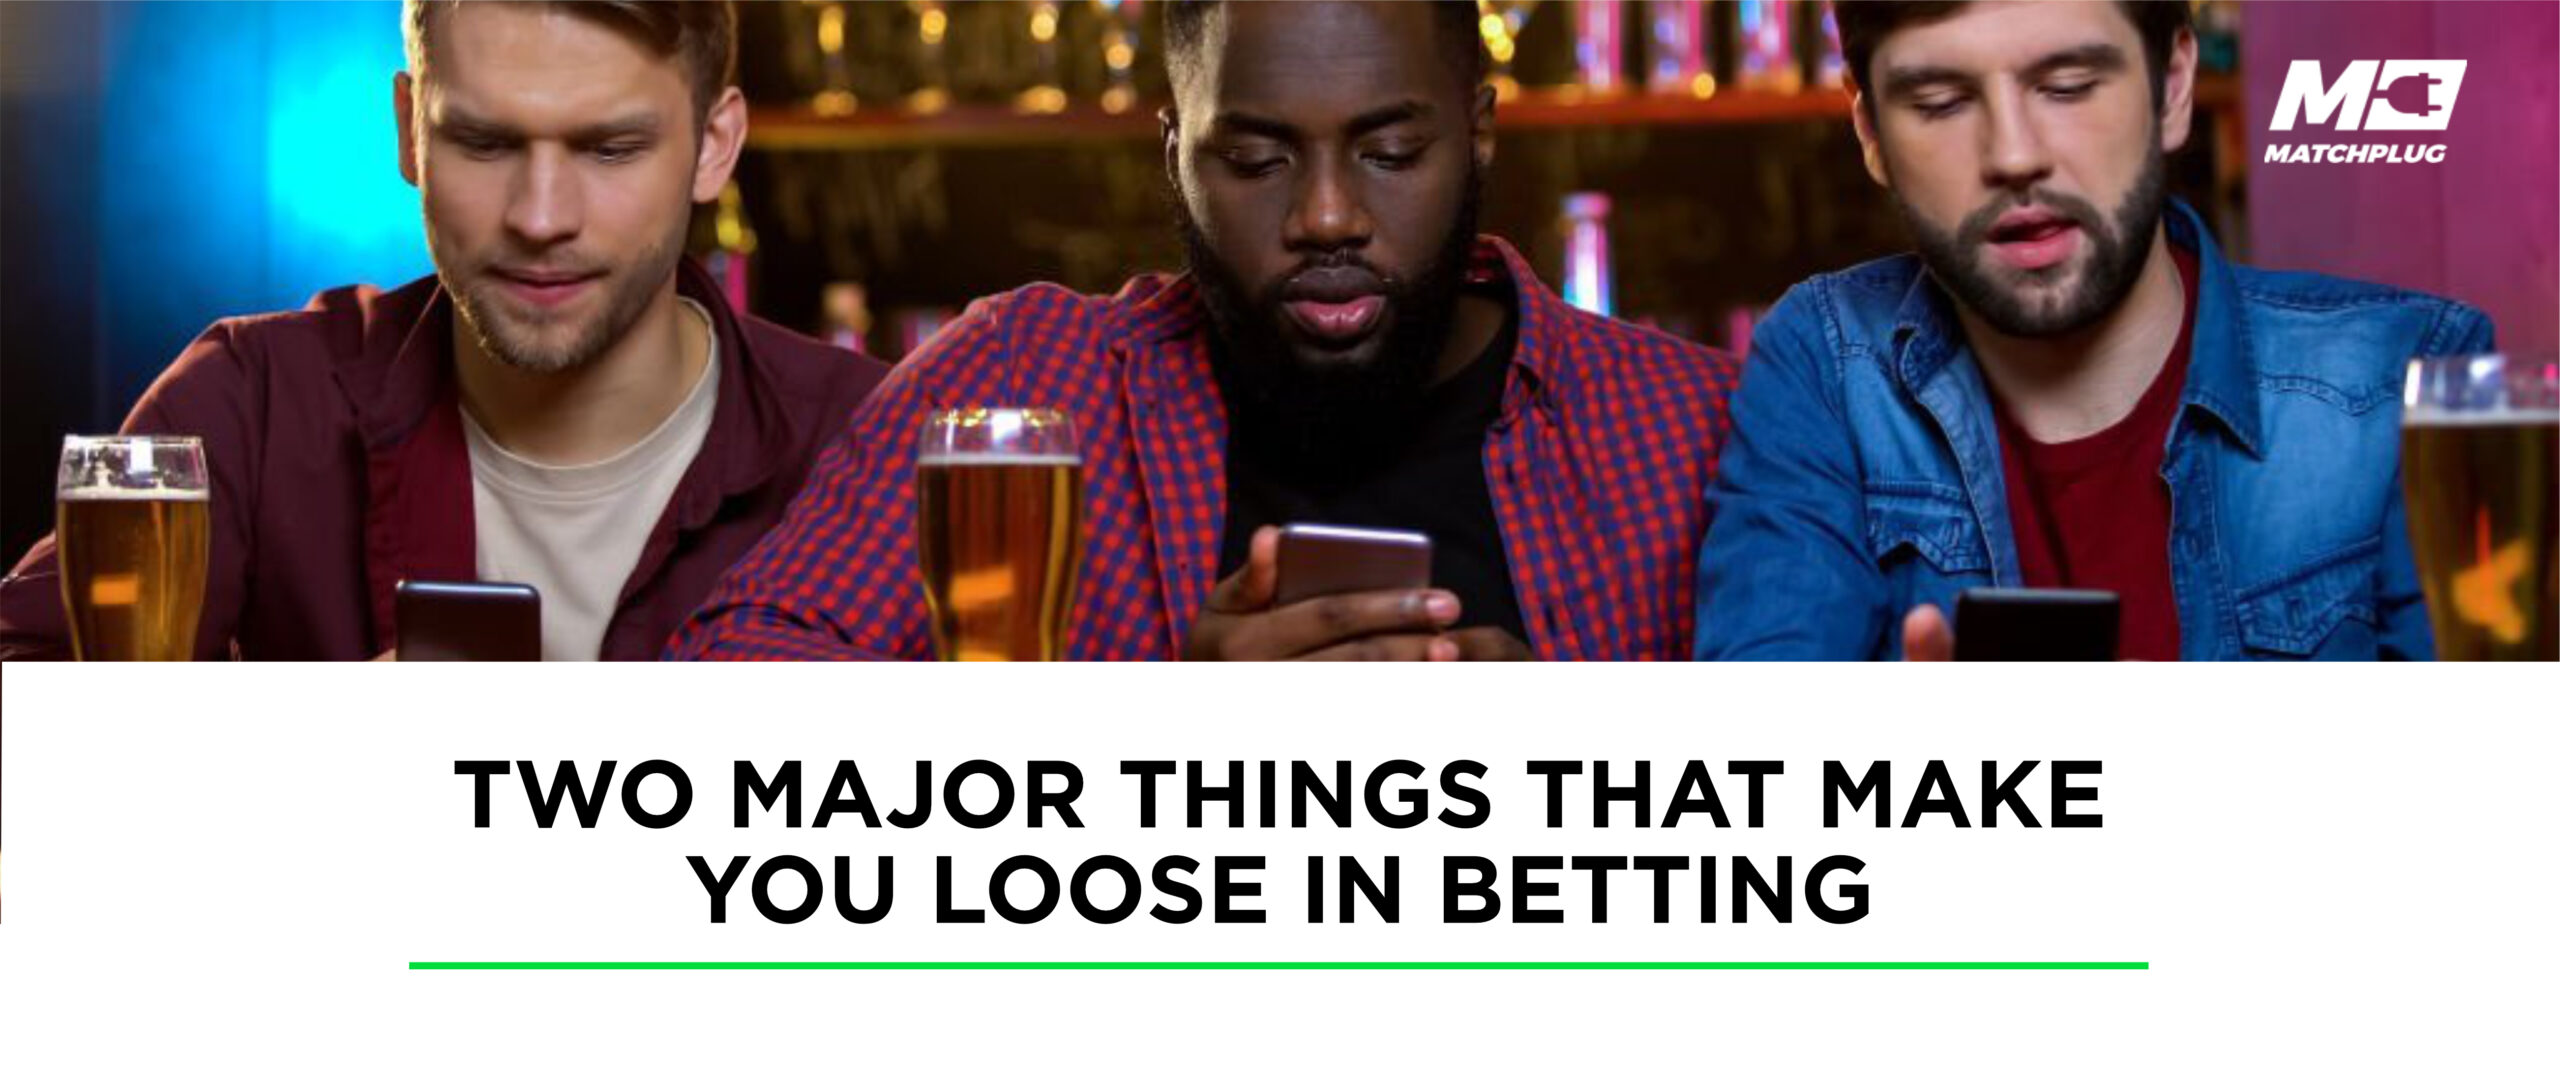 Two Major Things That Make You Lose In Betting